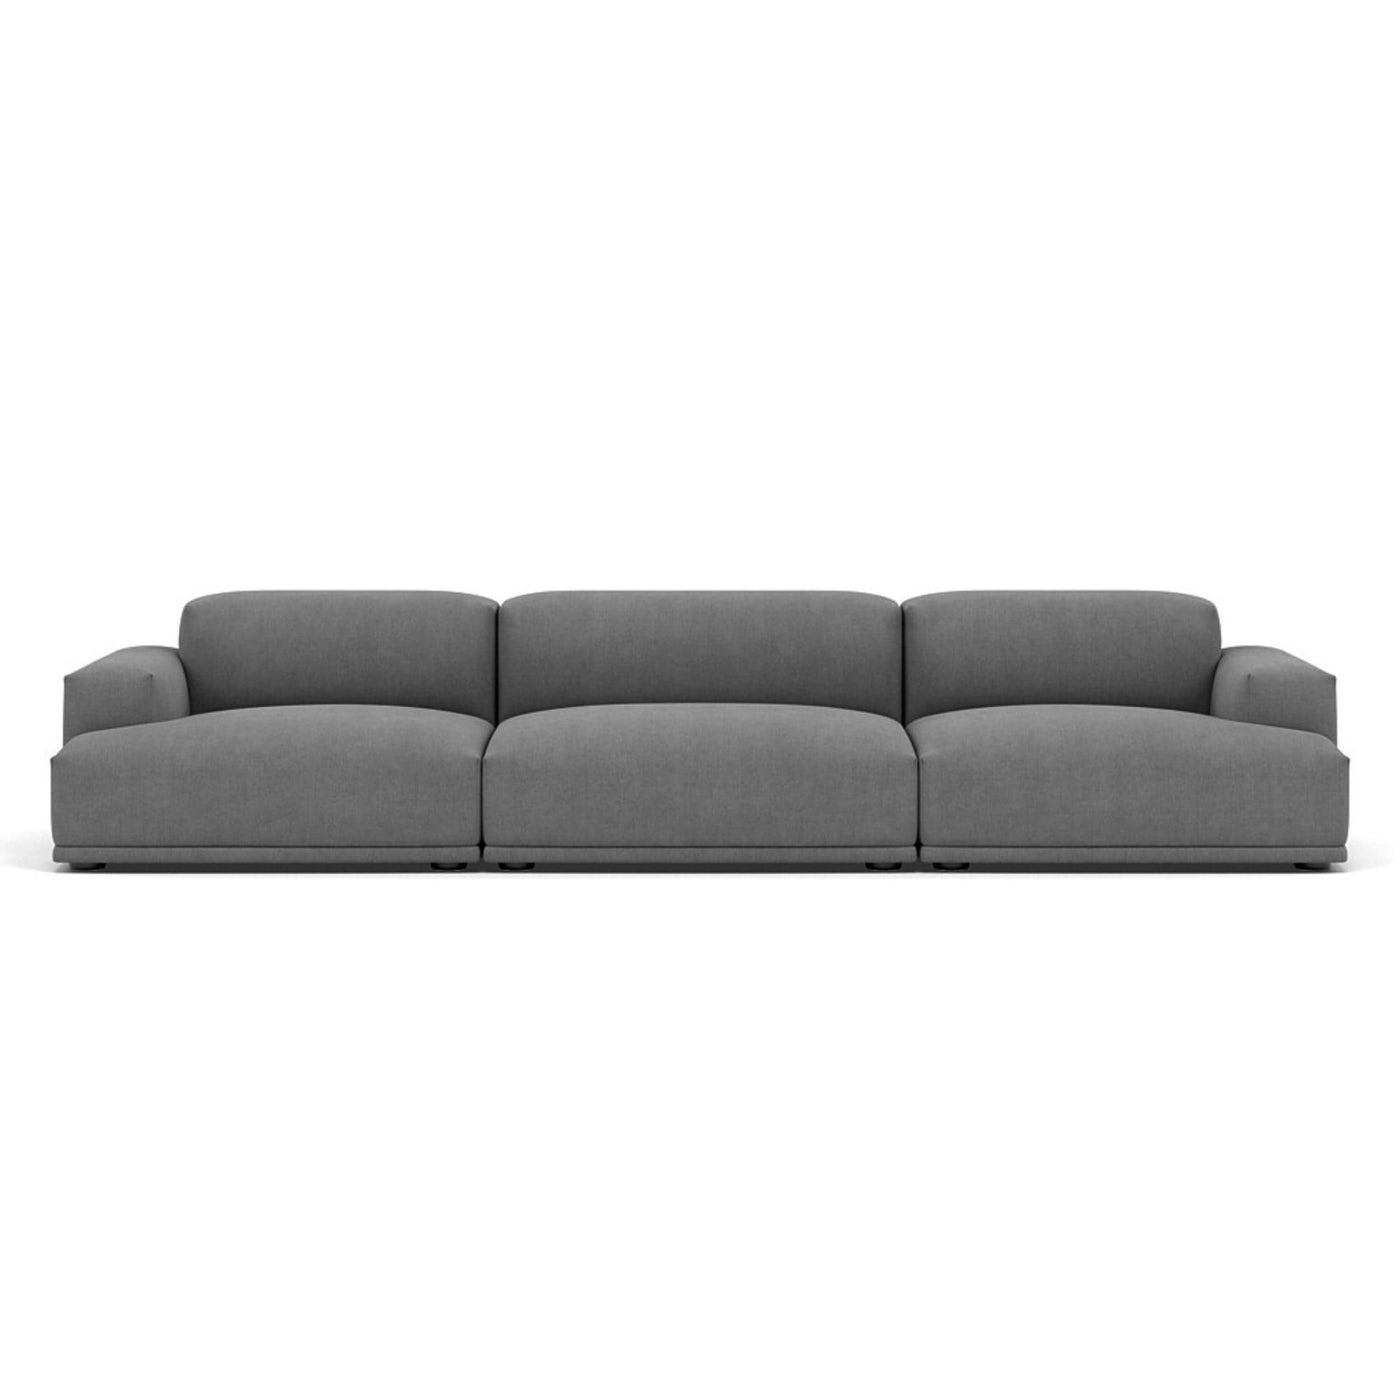 Muuto Connect modular sofa 3 seater. Made to order from someday designs.  #colour_fiord-171